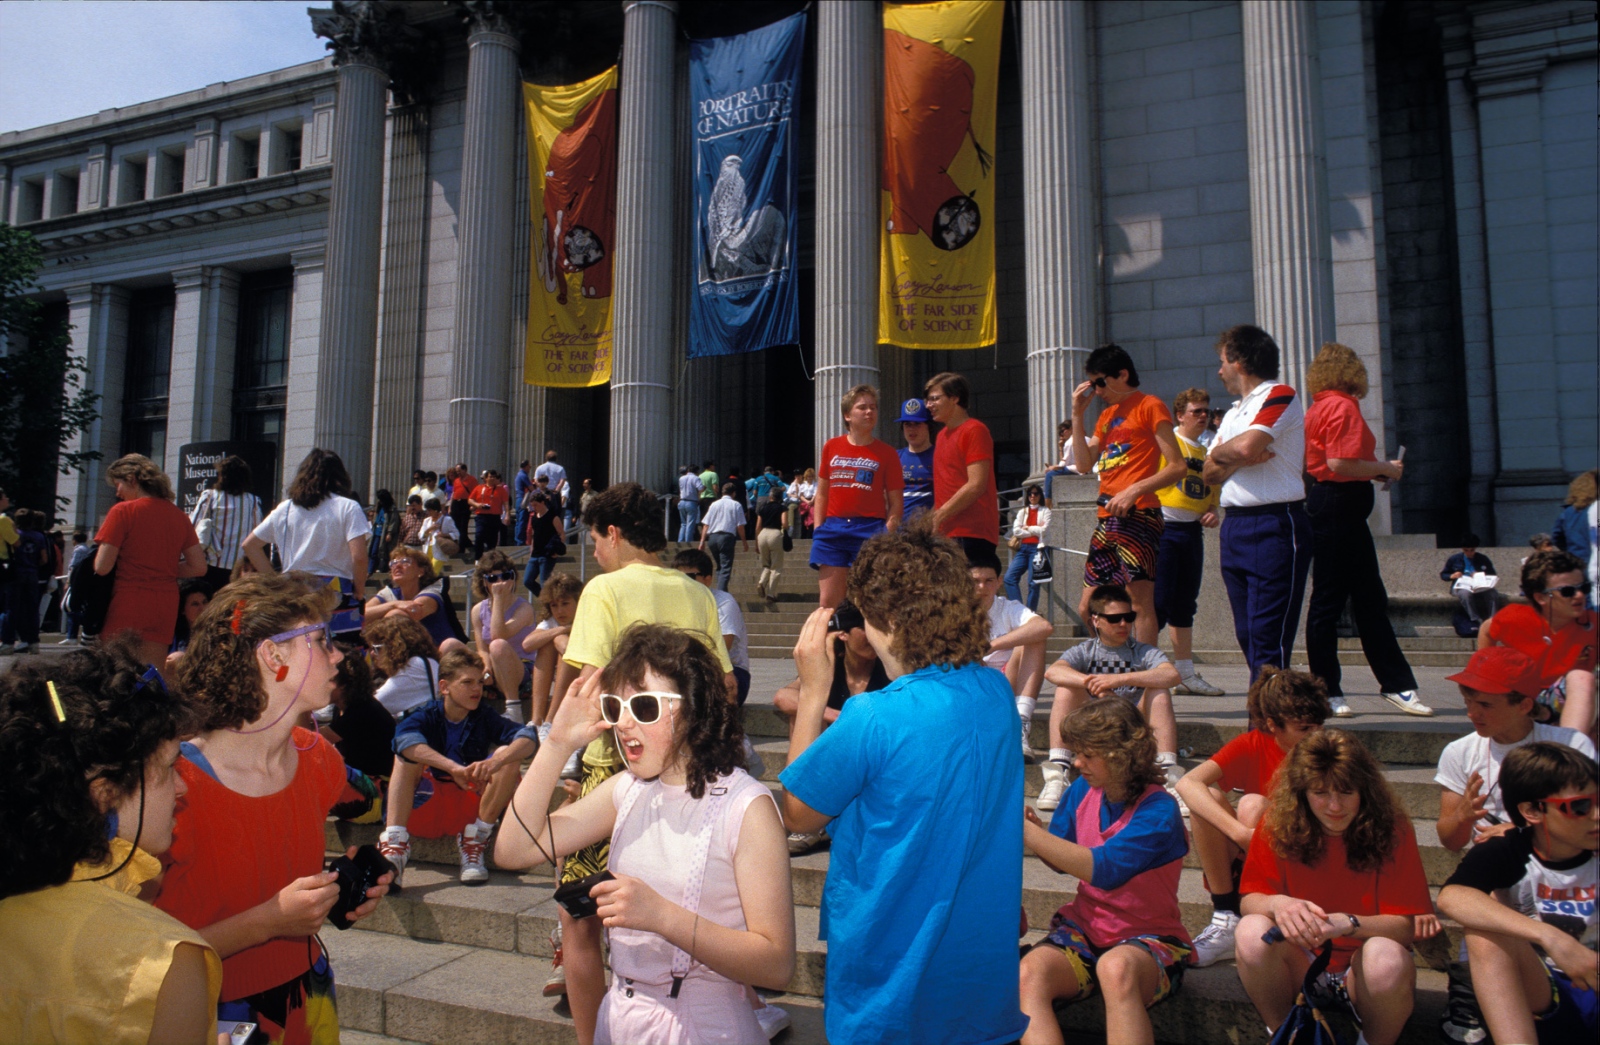 Every year 19 million tourists descend on Washington, DC, swarming the monuments and museums.